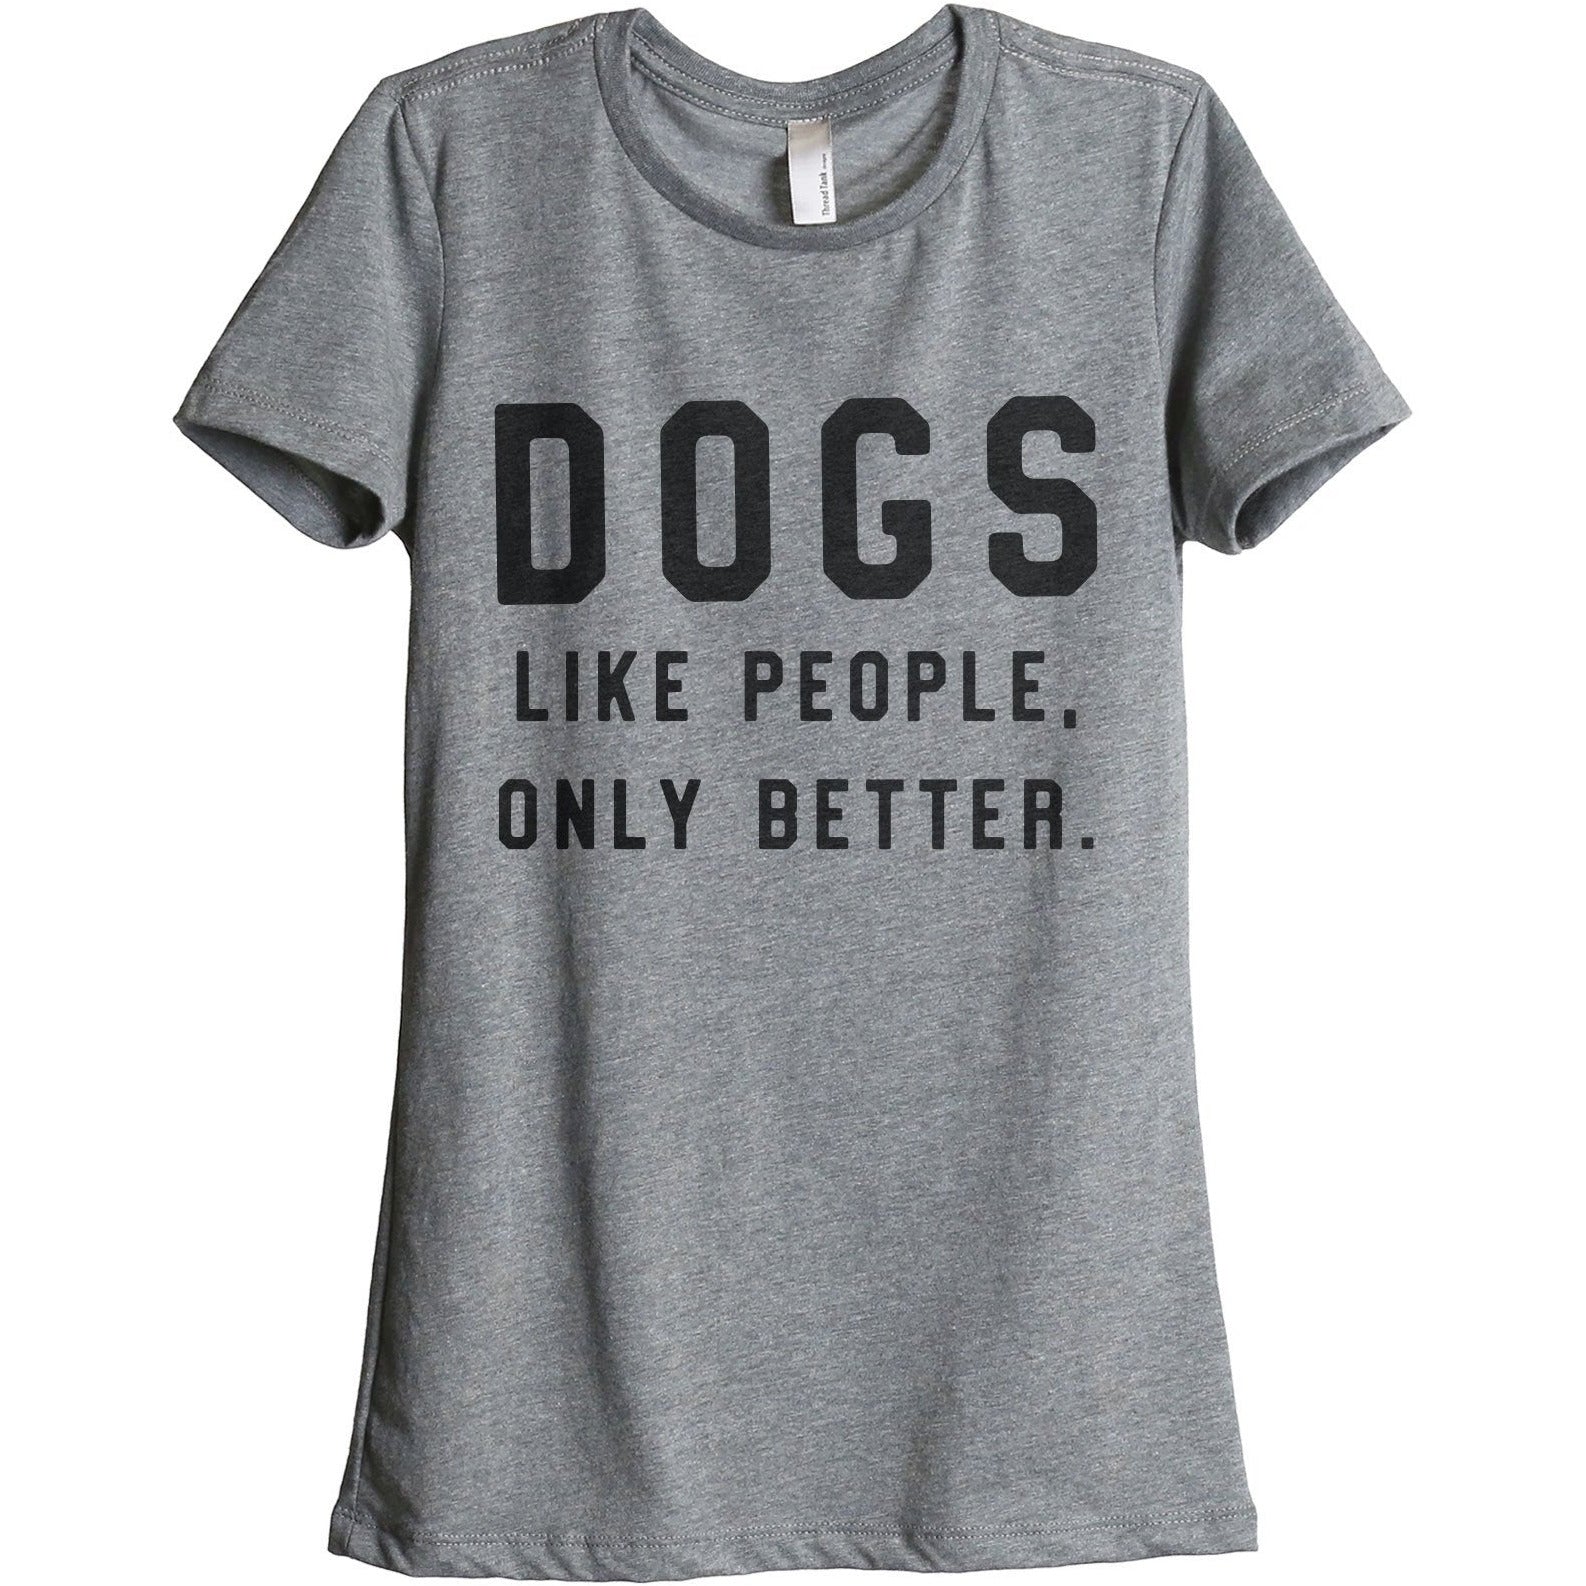 Dogs Like People Only Better Women's Relaxed Crewneck T-Shirt Top Tee Heather Grey